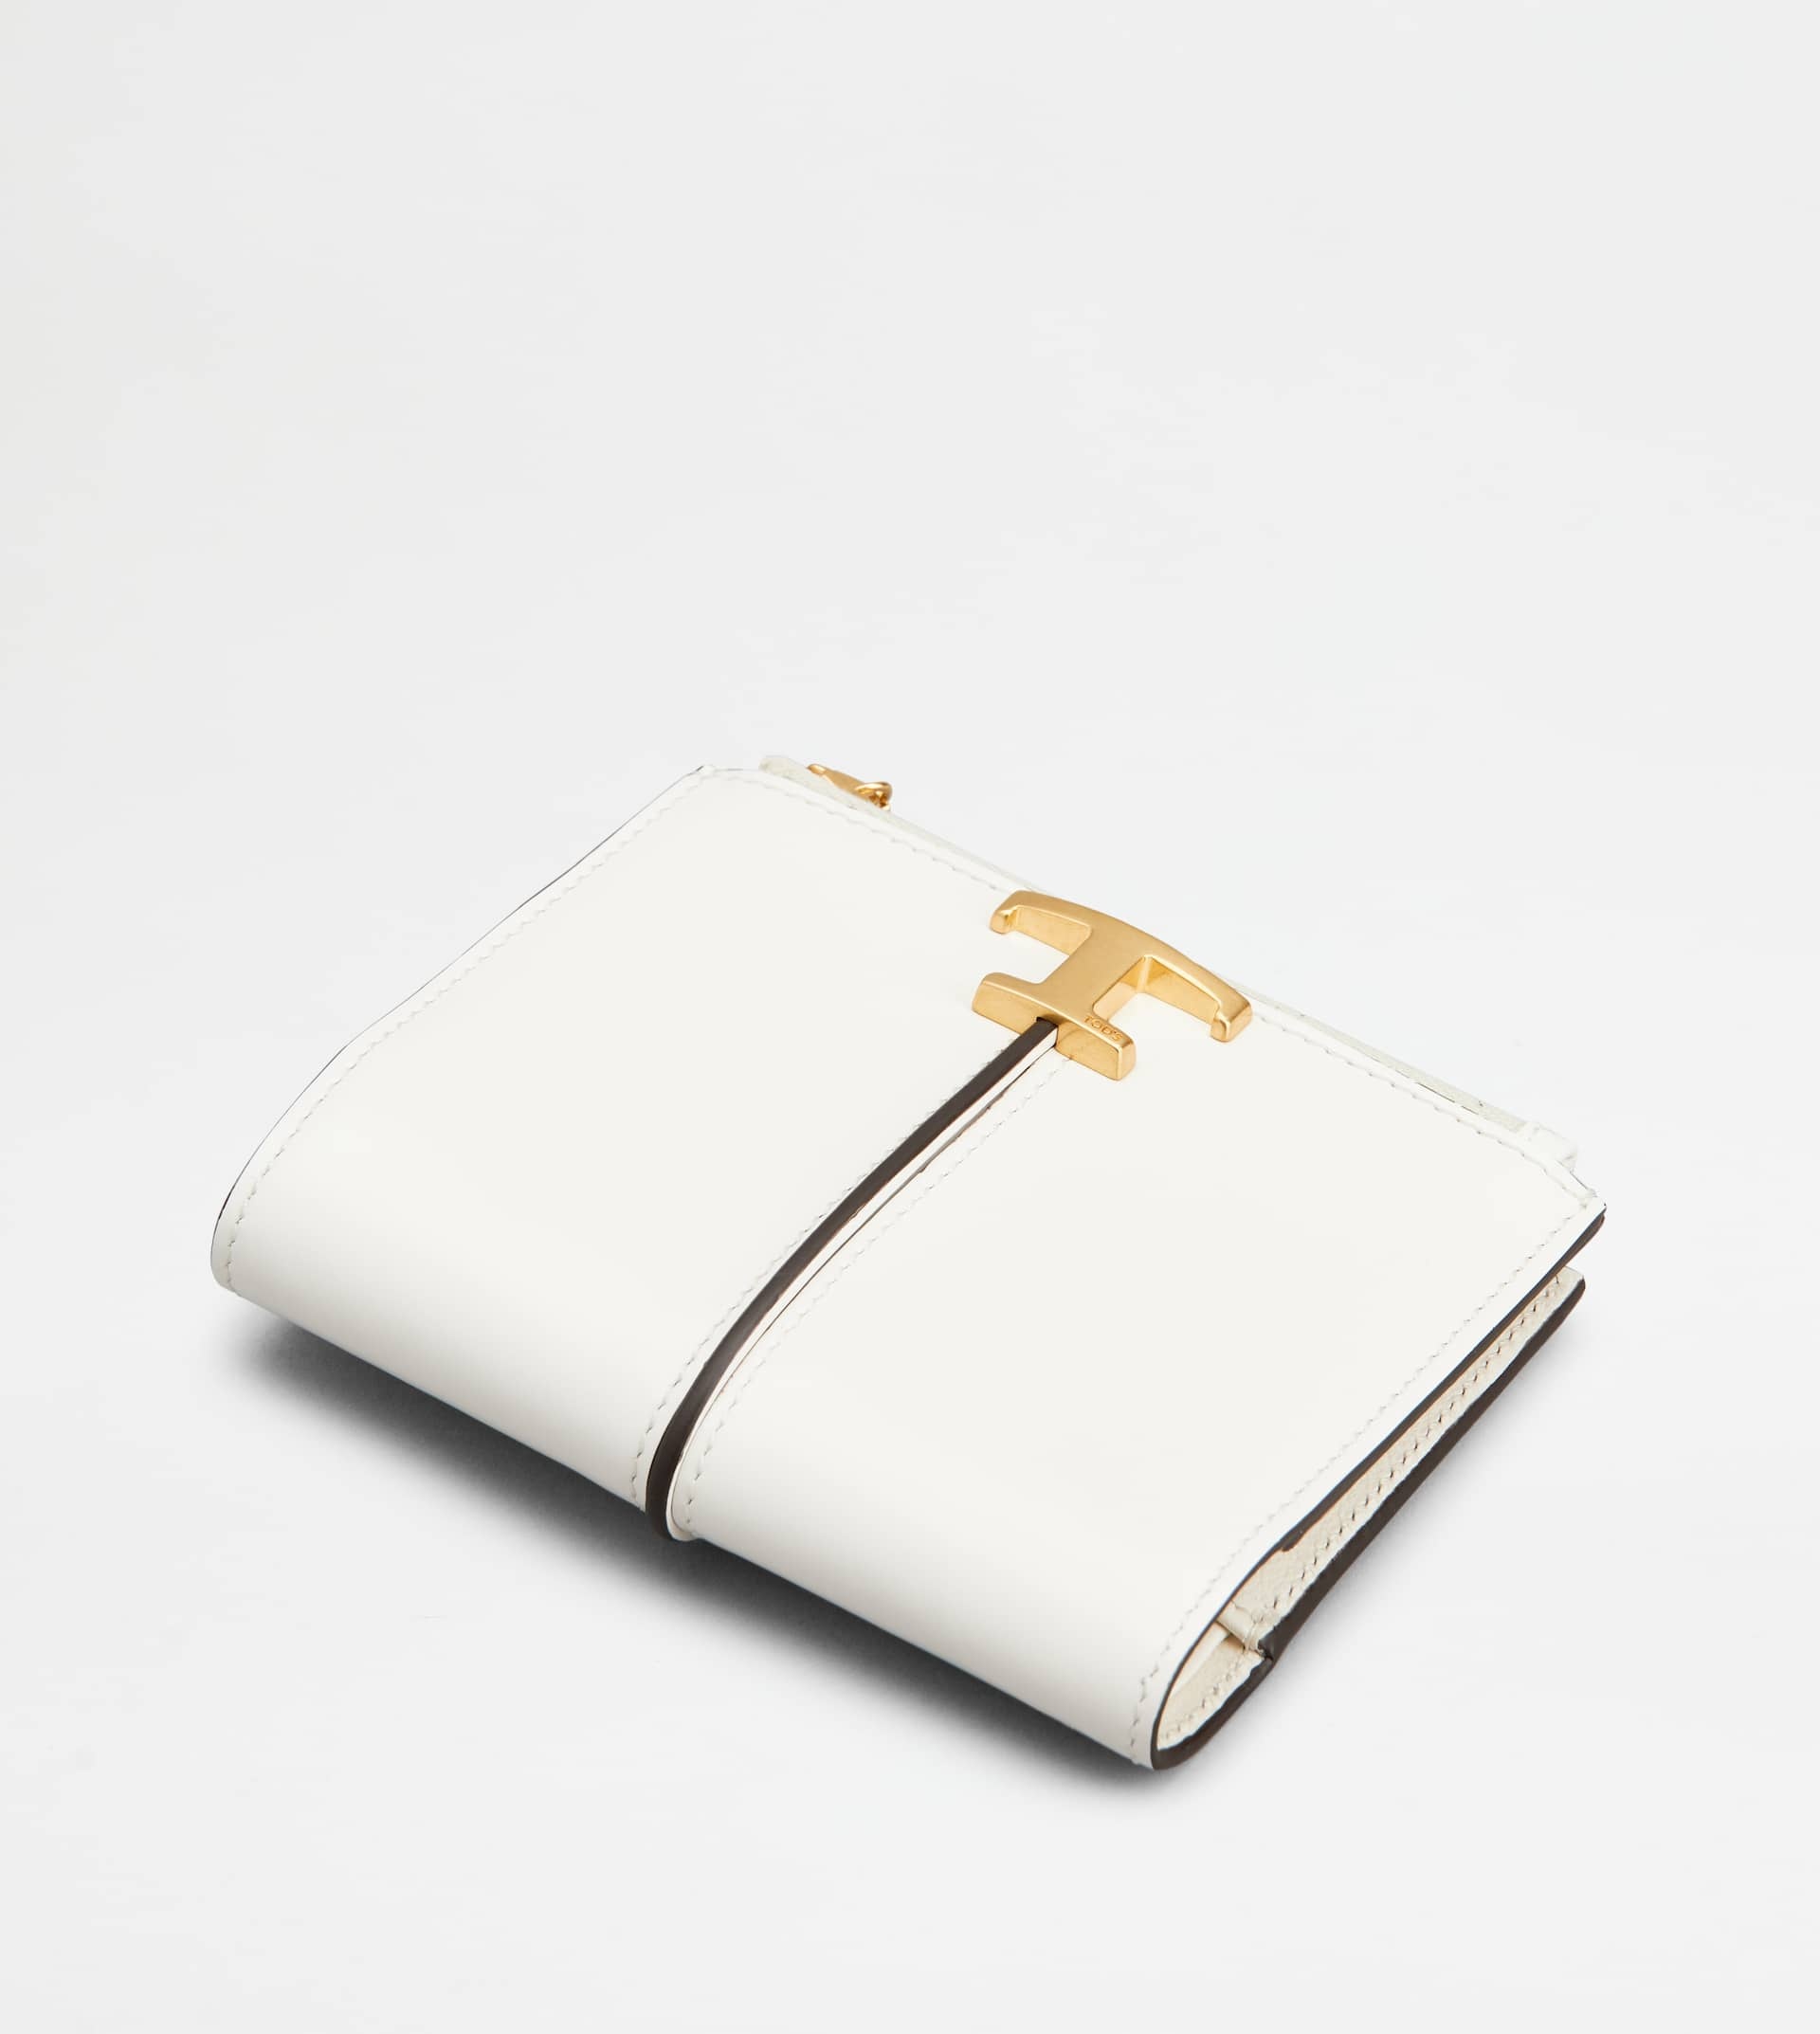 T TIMELESS WALLET IN LEATHER - WHITE - 4